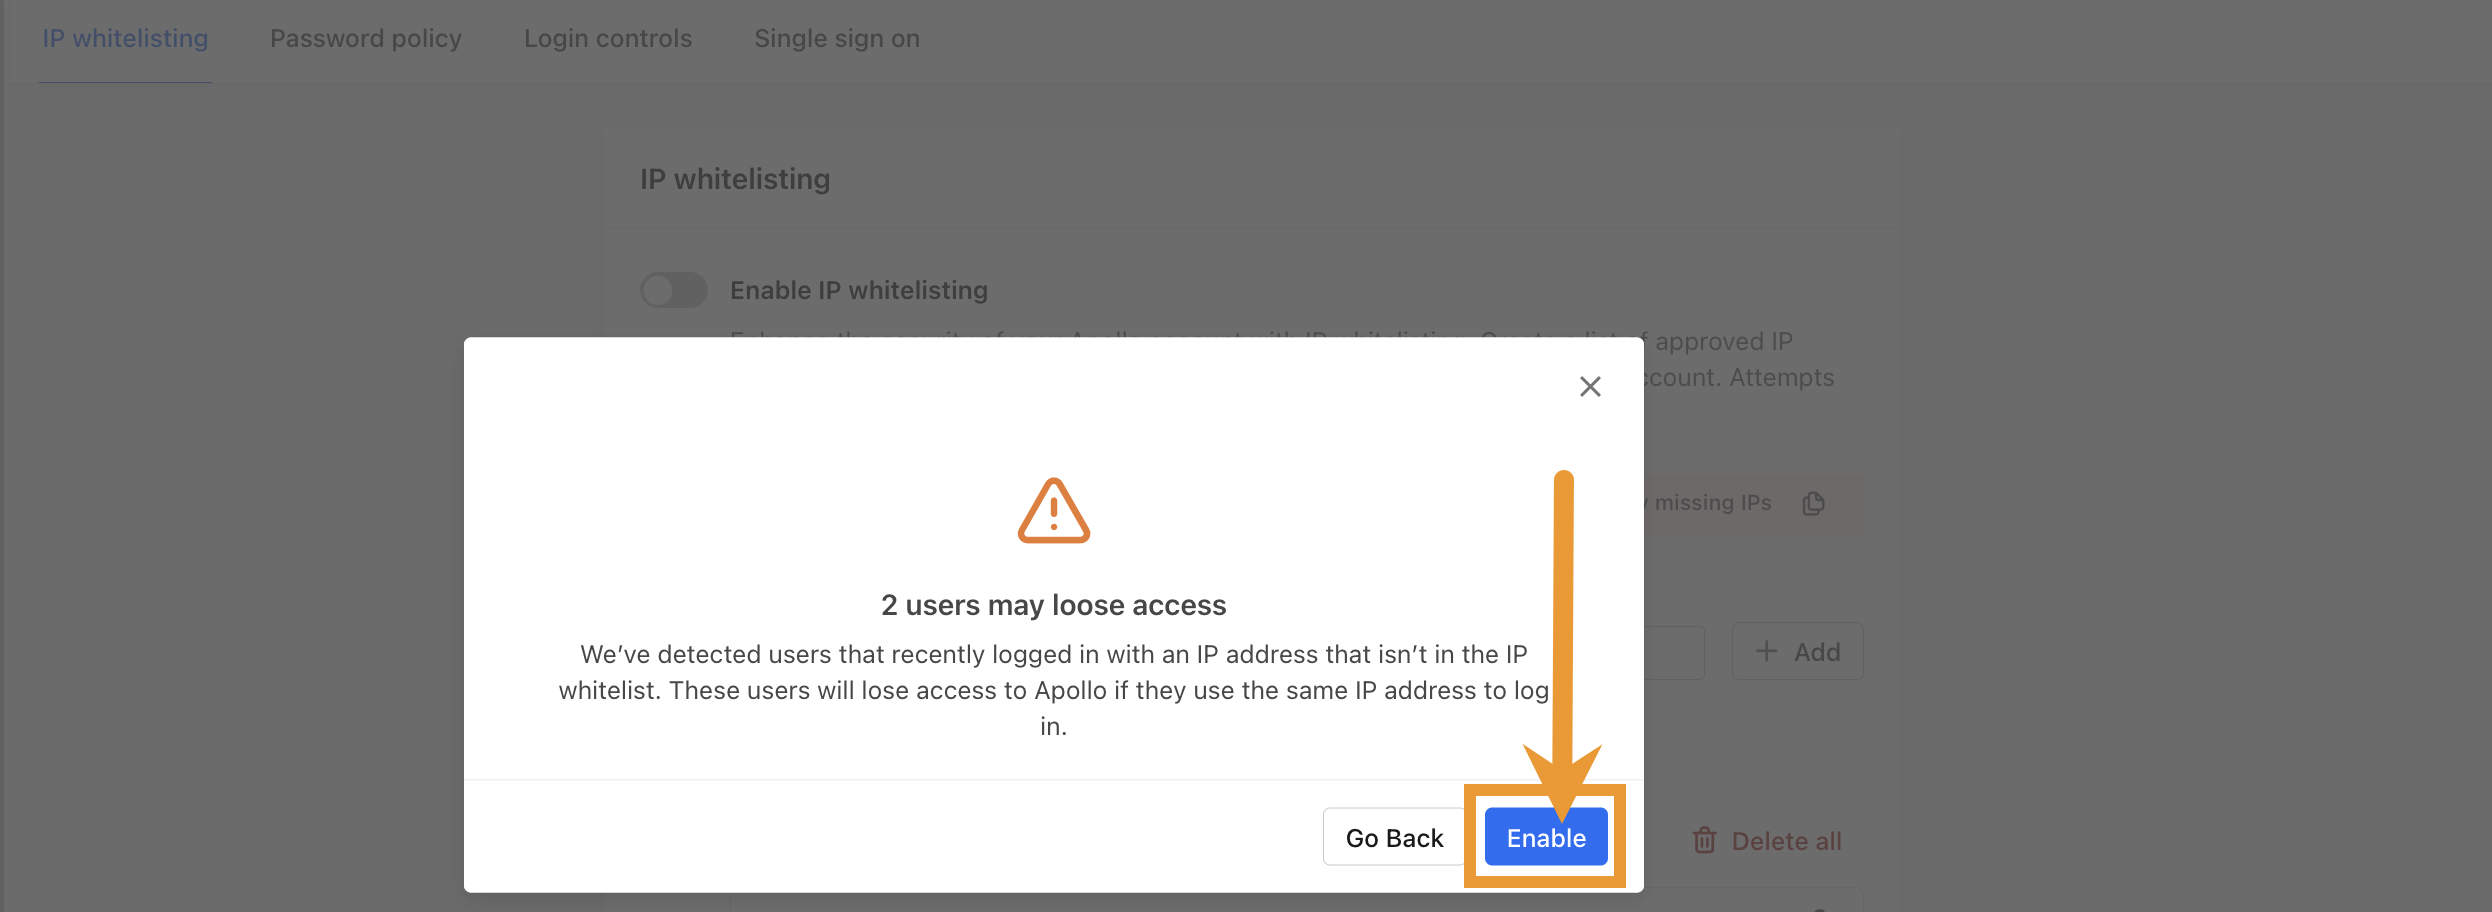 Enable button in warning pop-up